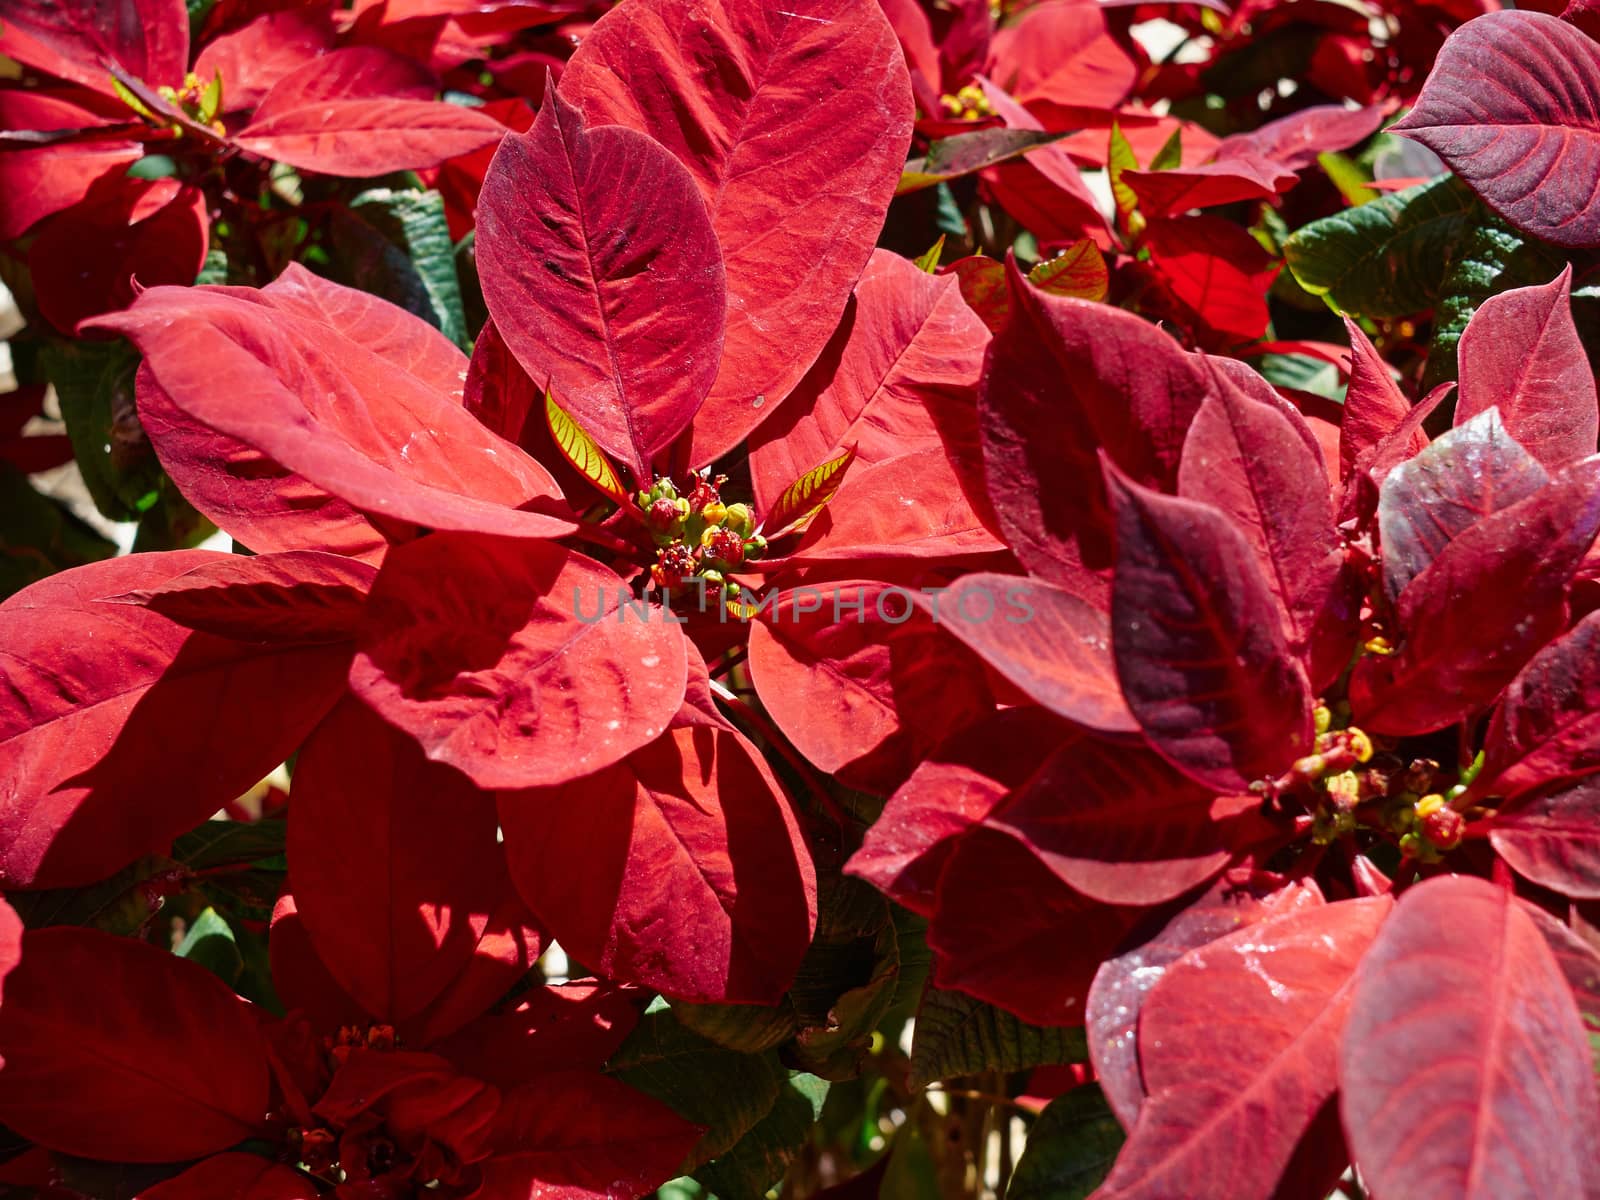 Blooming red Poinsettia Christmas plant flower by Ronyzmbow